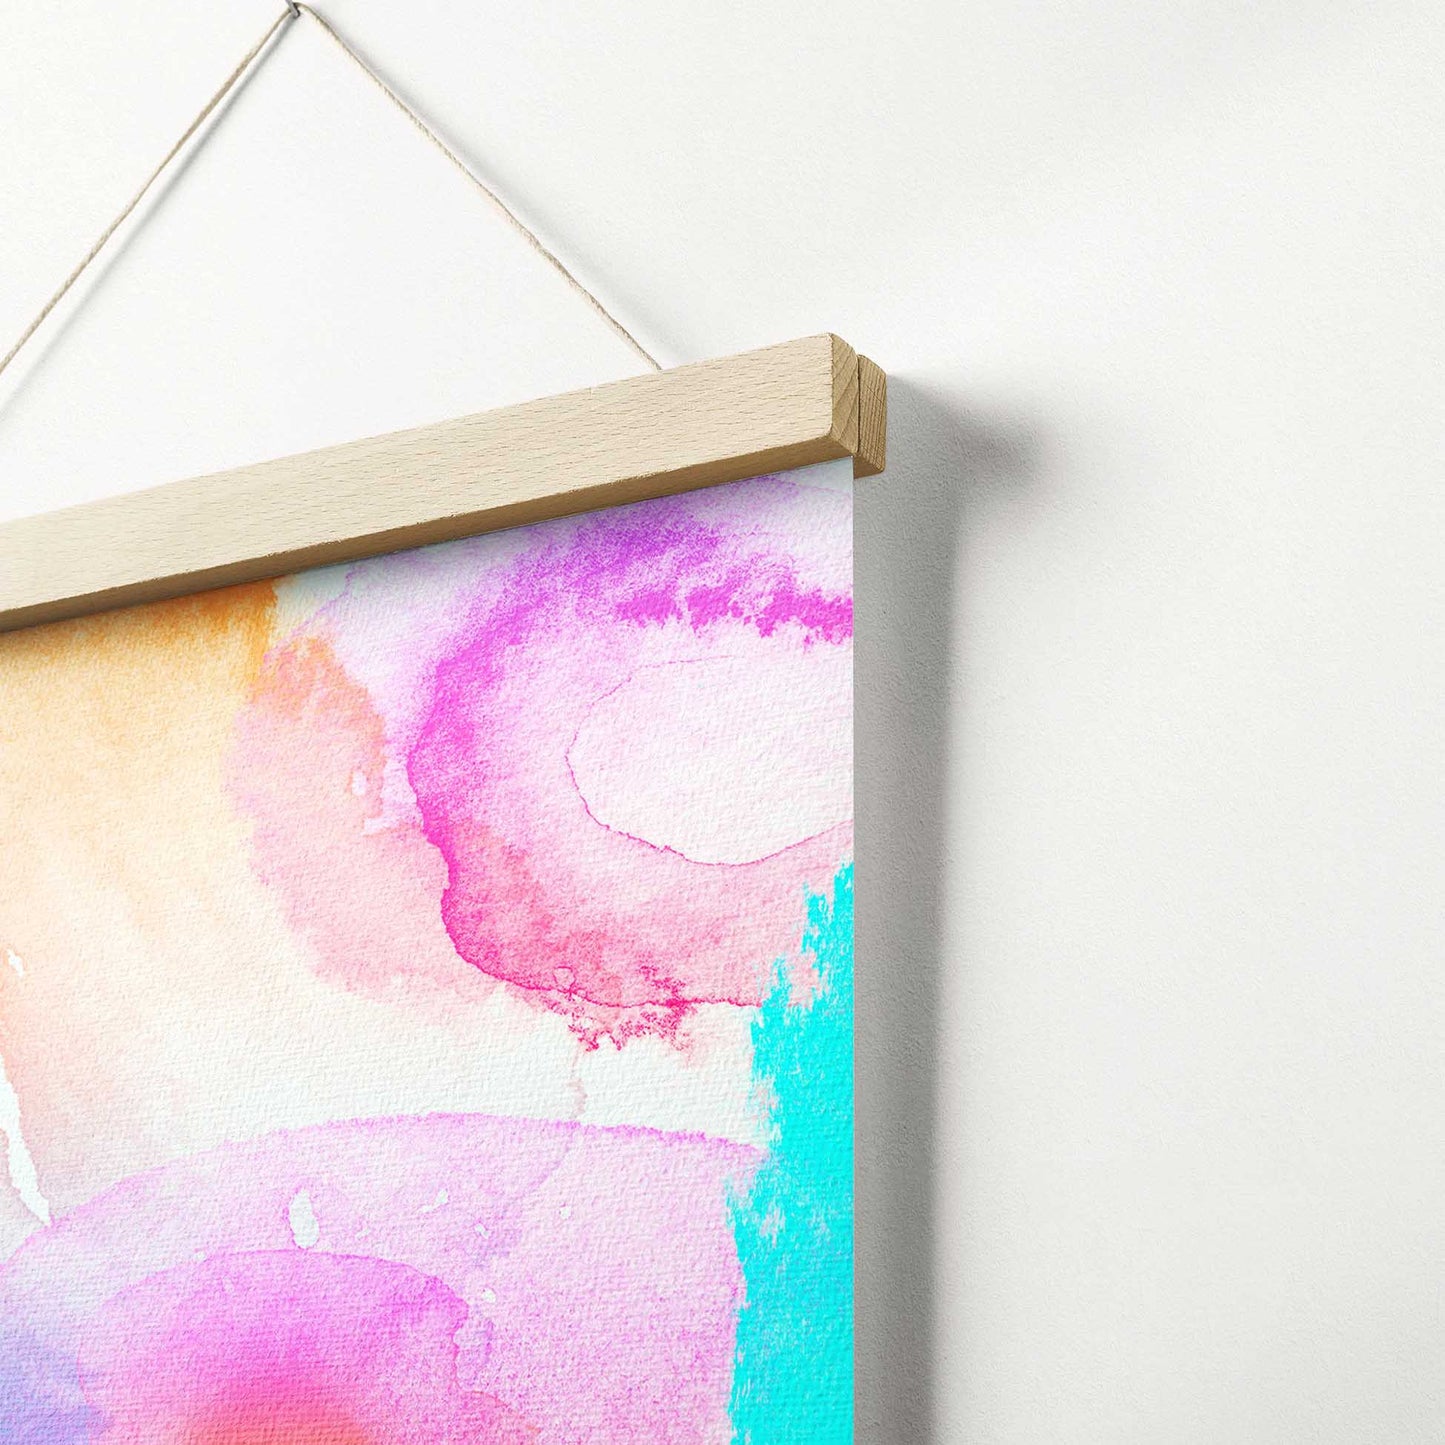 Infuse your home with artistic charm using the Personalised Pencil Drawing Poster Hanger. Its pencil effect transforms any photo into a captivating minimalist masterpiece. With its vibrant colors and cool design